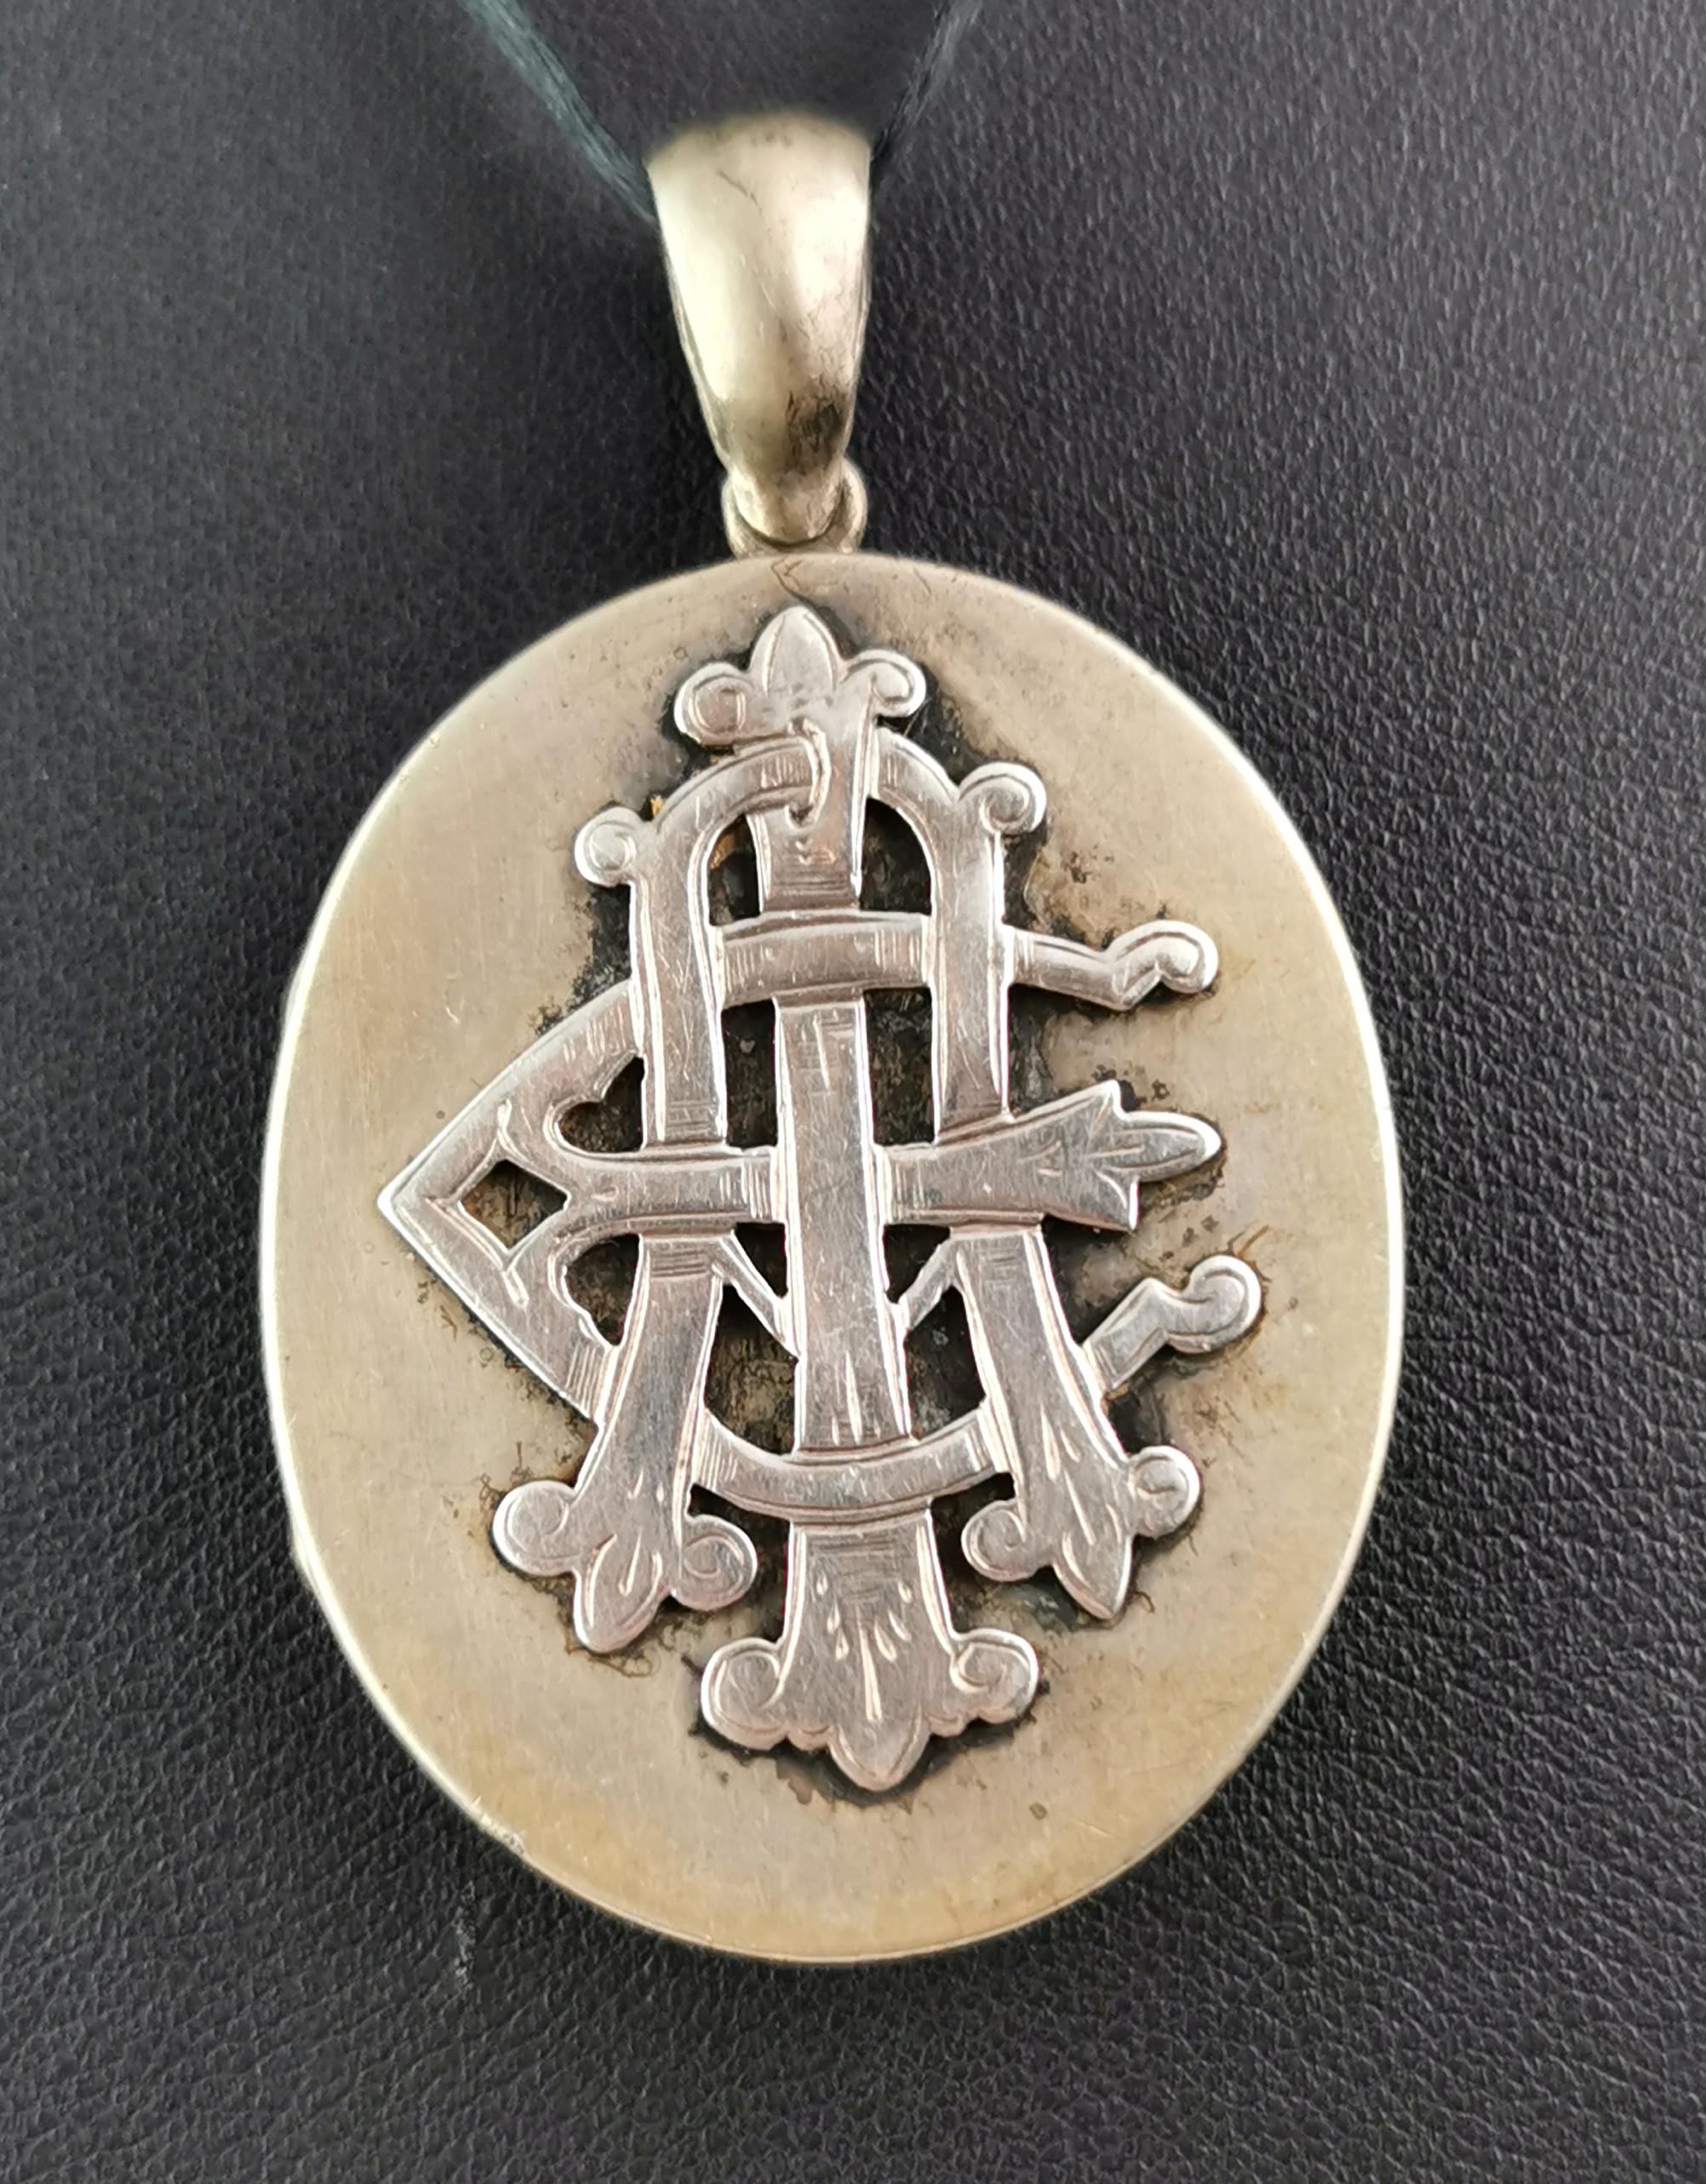 A fantastic antique Victorian era AEI locket pendant.

It is a silver plated locket with applied lettering to the front AEI in gothic script, this stands for Amity Eternity, Infinity this is thought to have Greek origins from the Greek meaning for